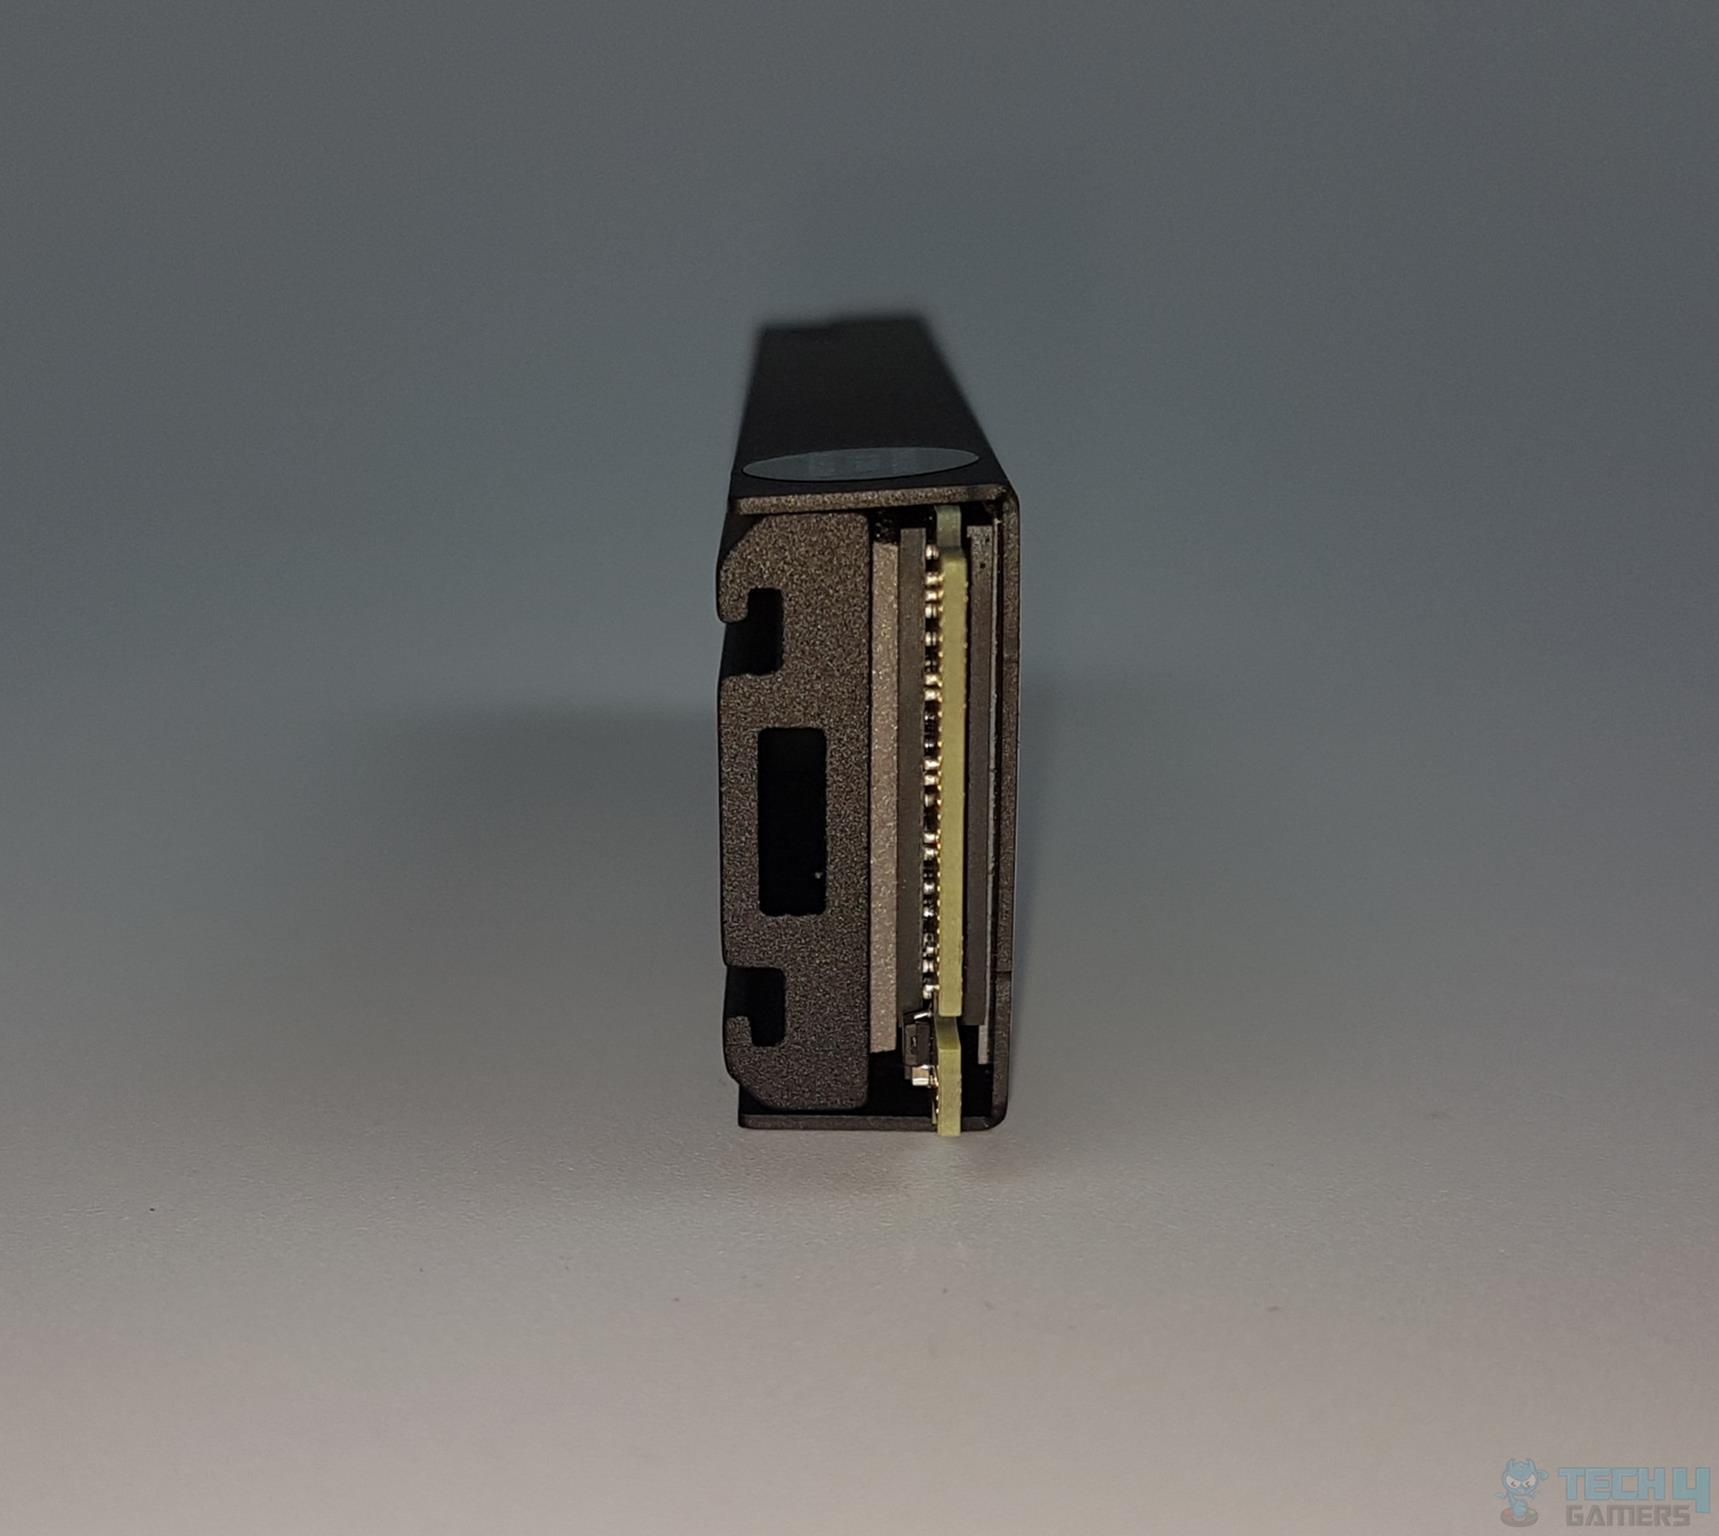 Kingston Fury Renegade 2TB NVMe SSD — A side view of the SSD